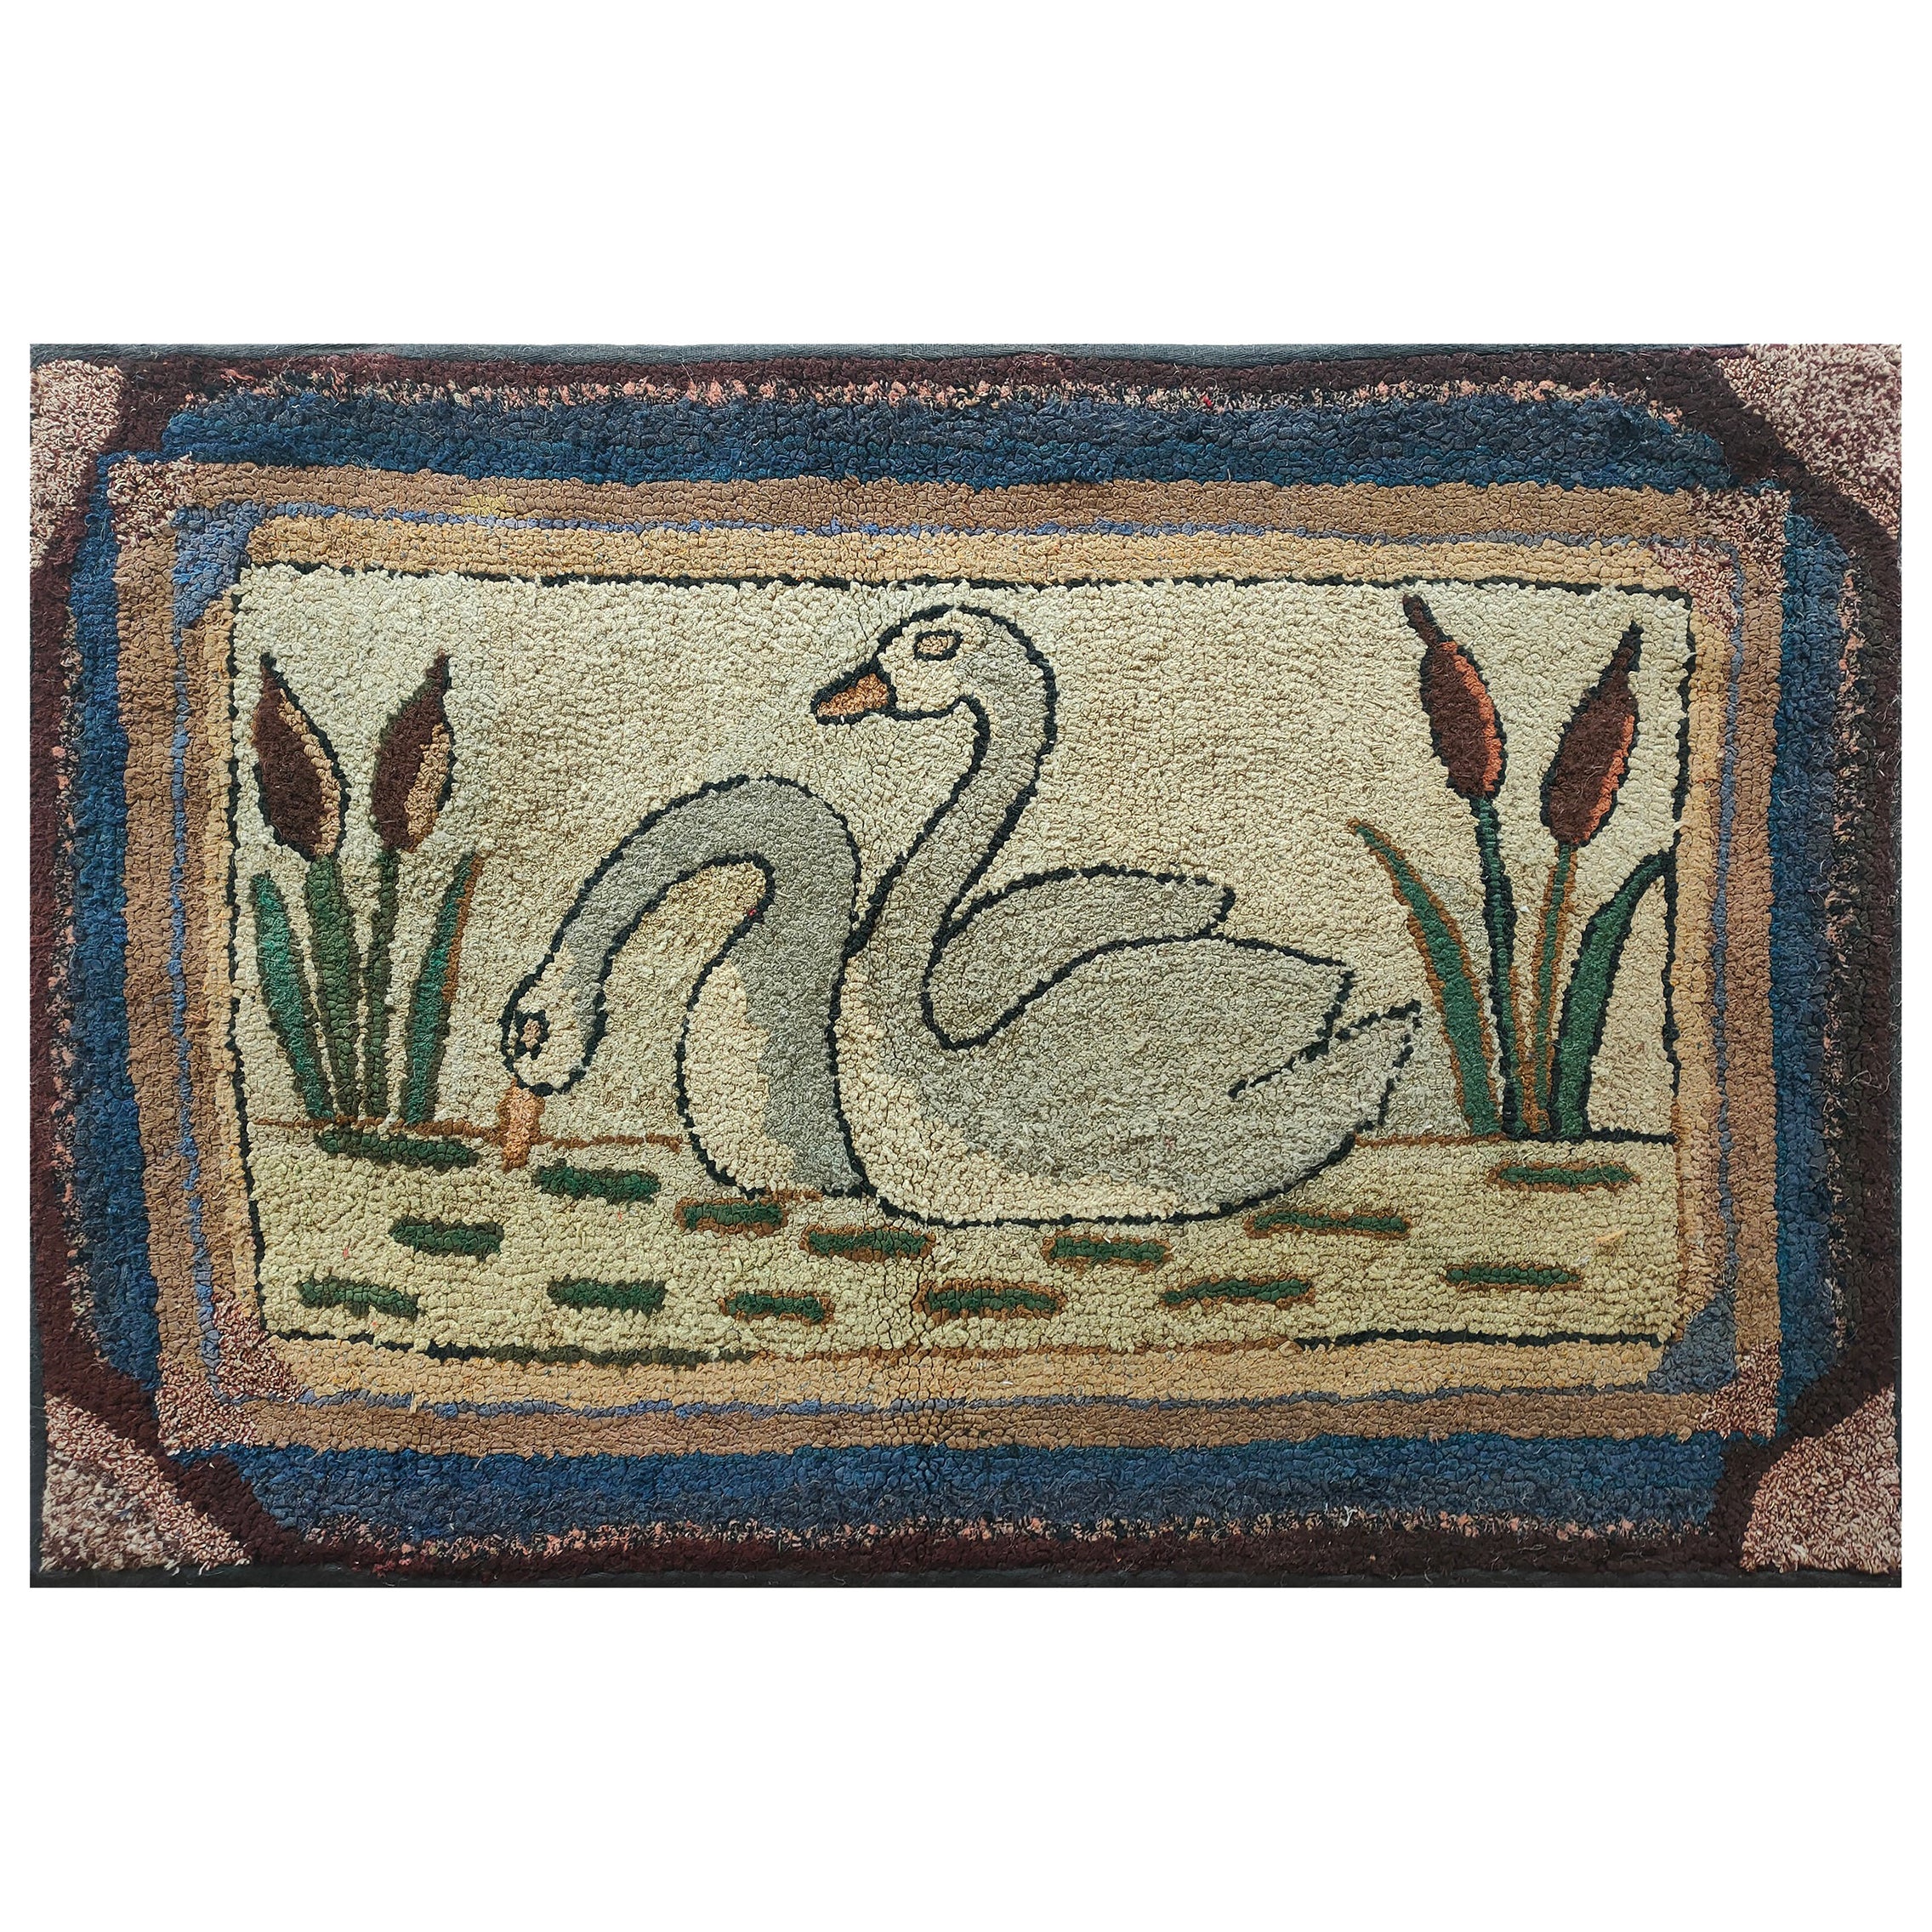 Mid 20th Century Pictorial American Hooked Rug ( 2'4" x 3'7" - 72 x 110 ) For Sale